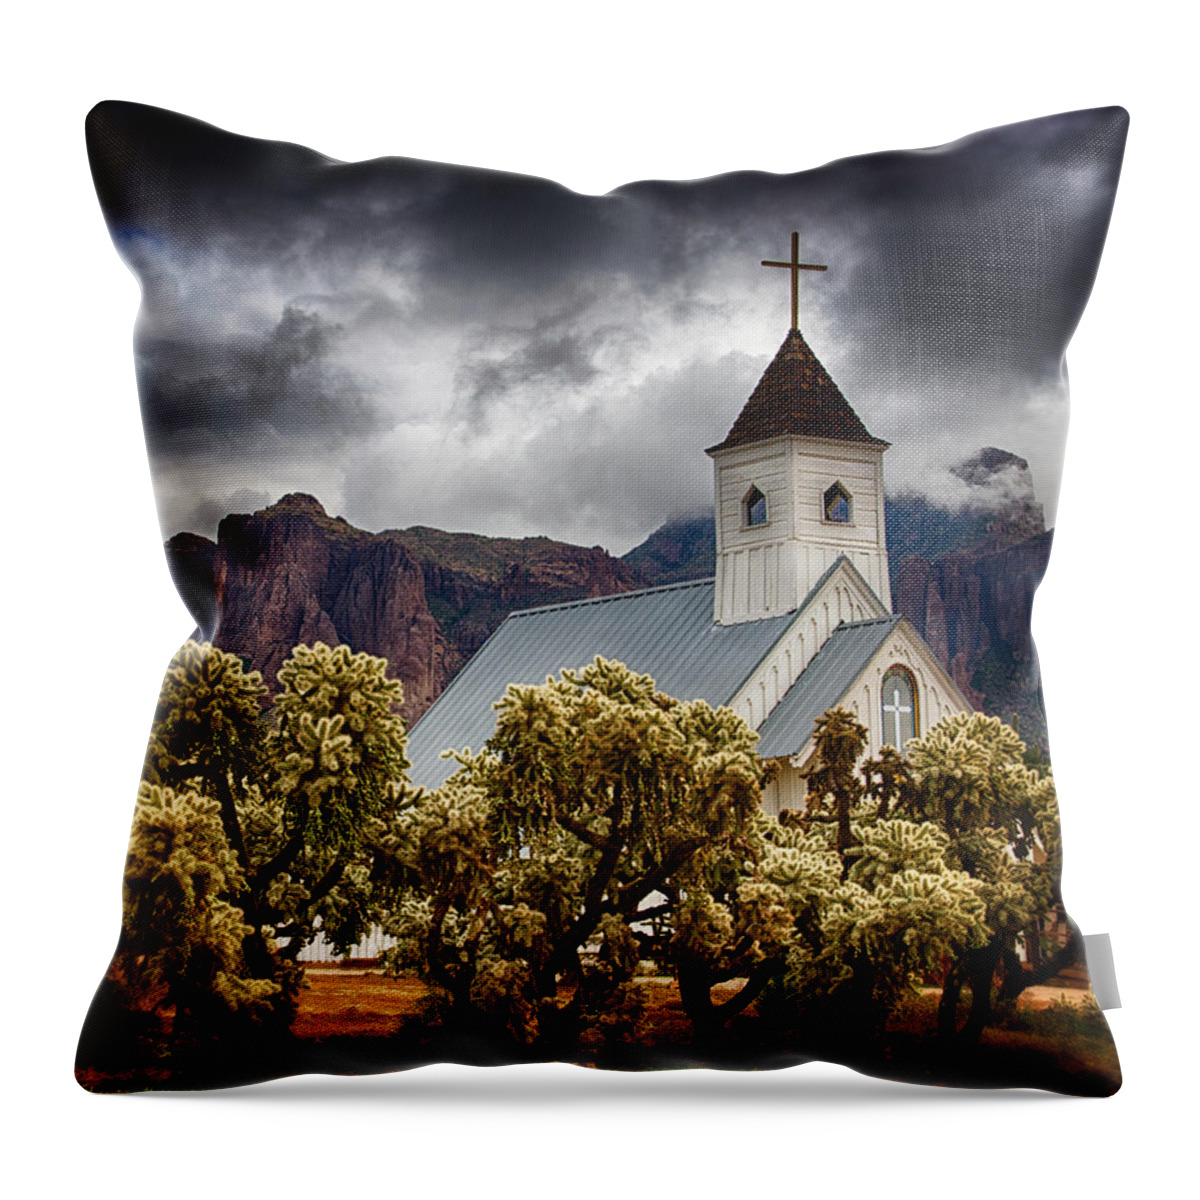 Stormy Throw Pillow featuring the photograph A Stormy Desert Afternoon by Saija Lehtonen